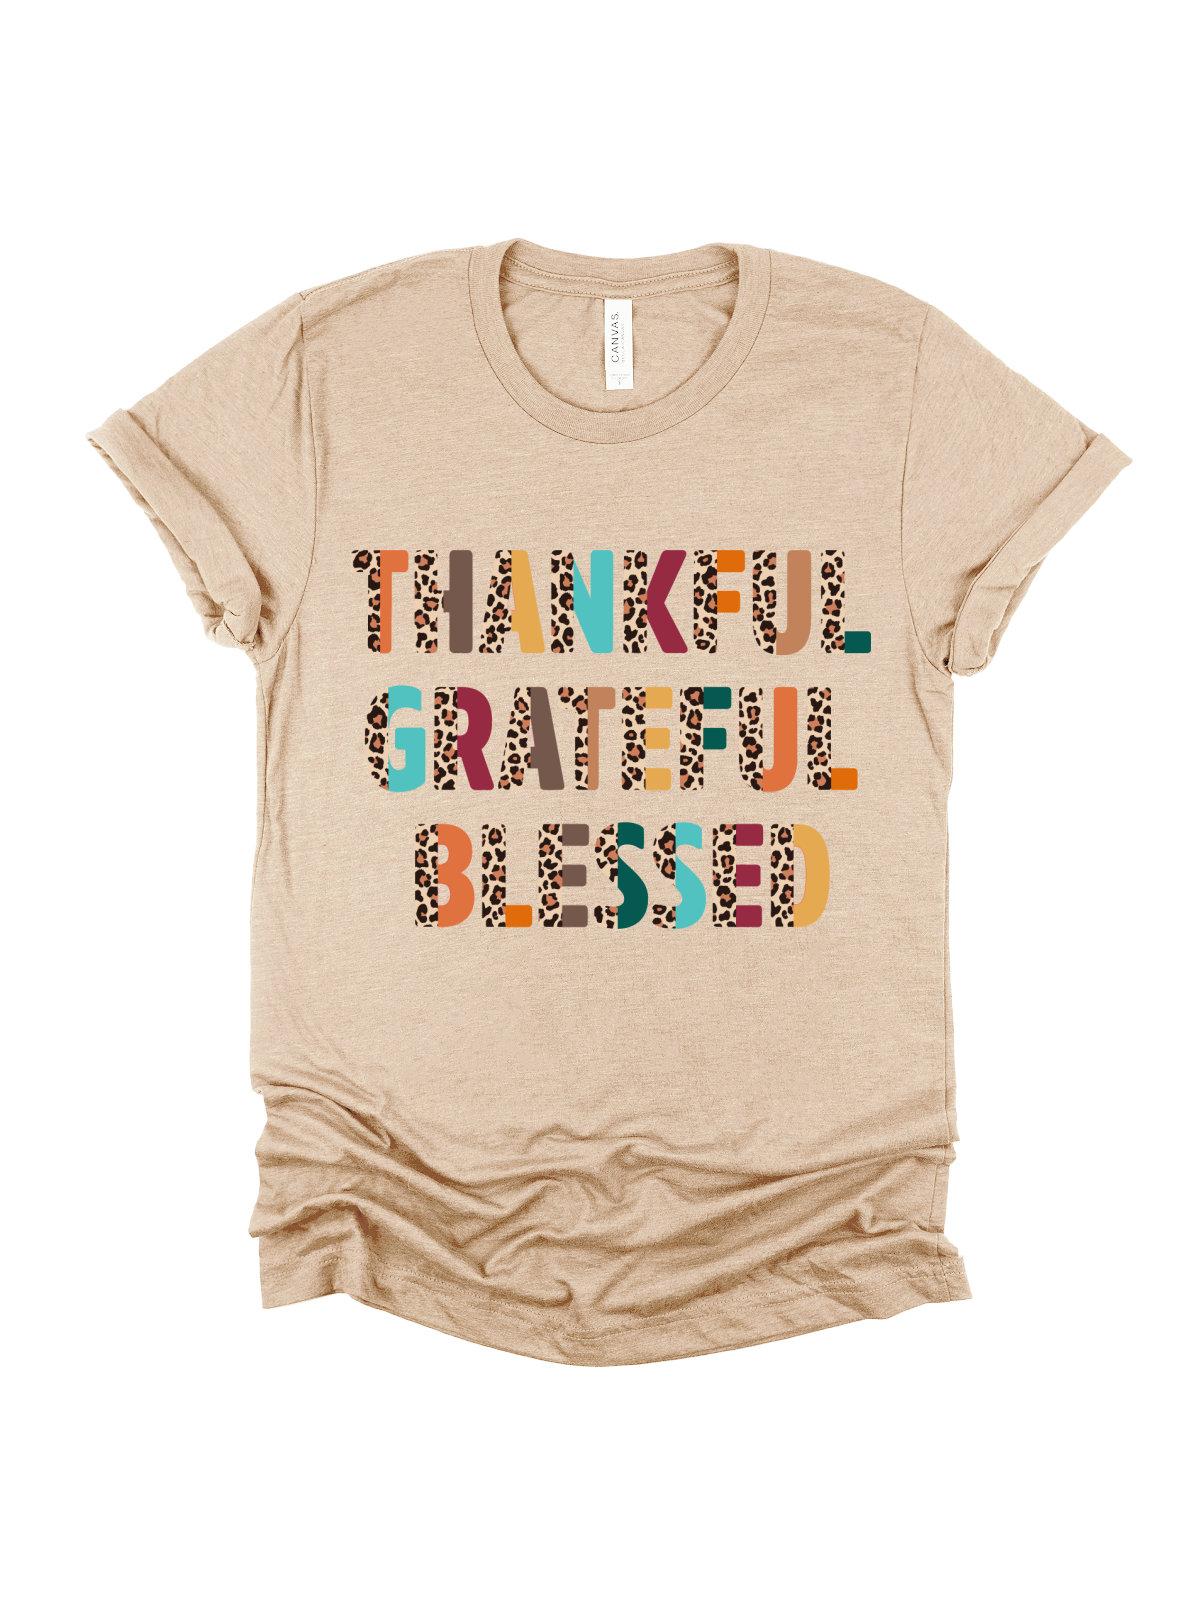 thankful, grateful, and blessed adult thanksgiving shirt